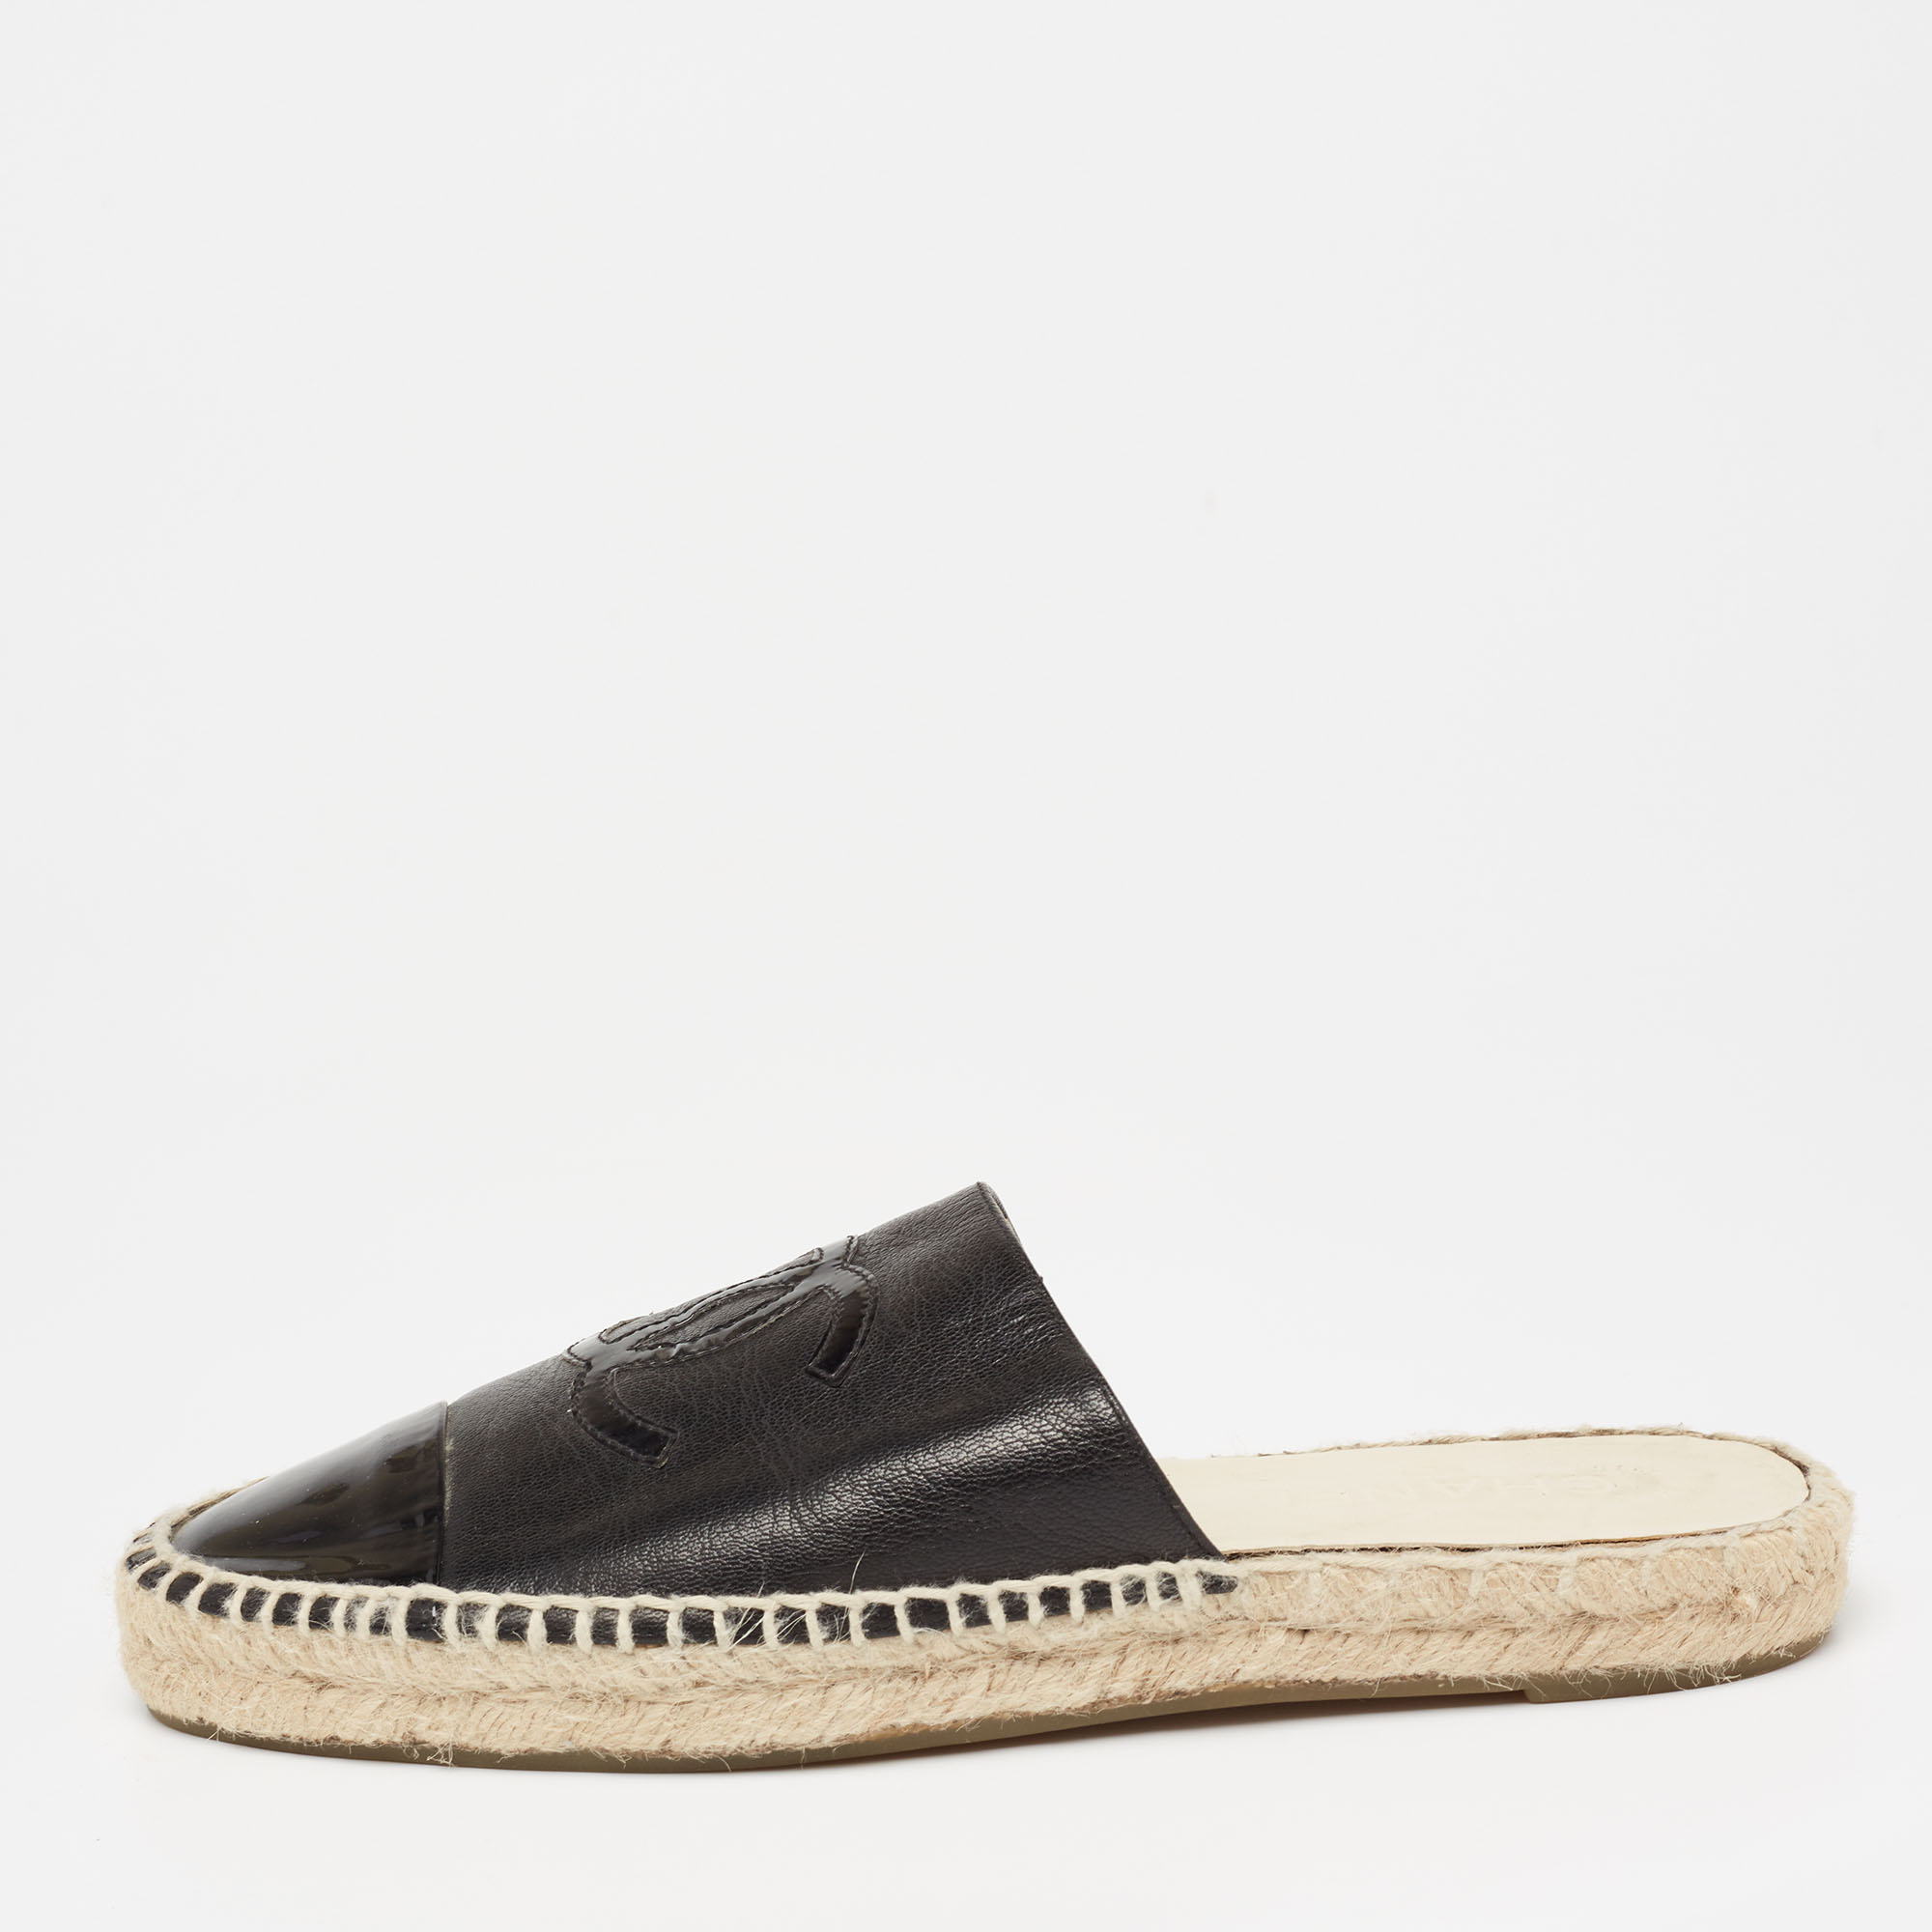 New CHANEL Black Patent CC Backless Double Sole Espadrille Slide